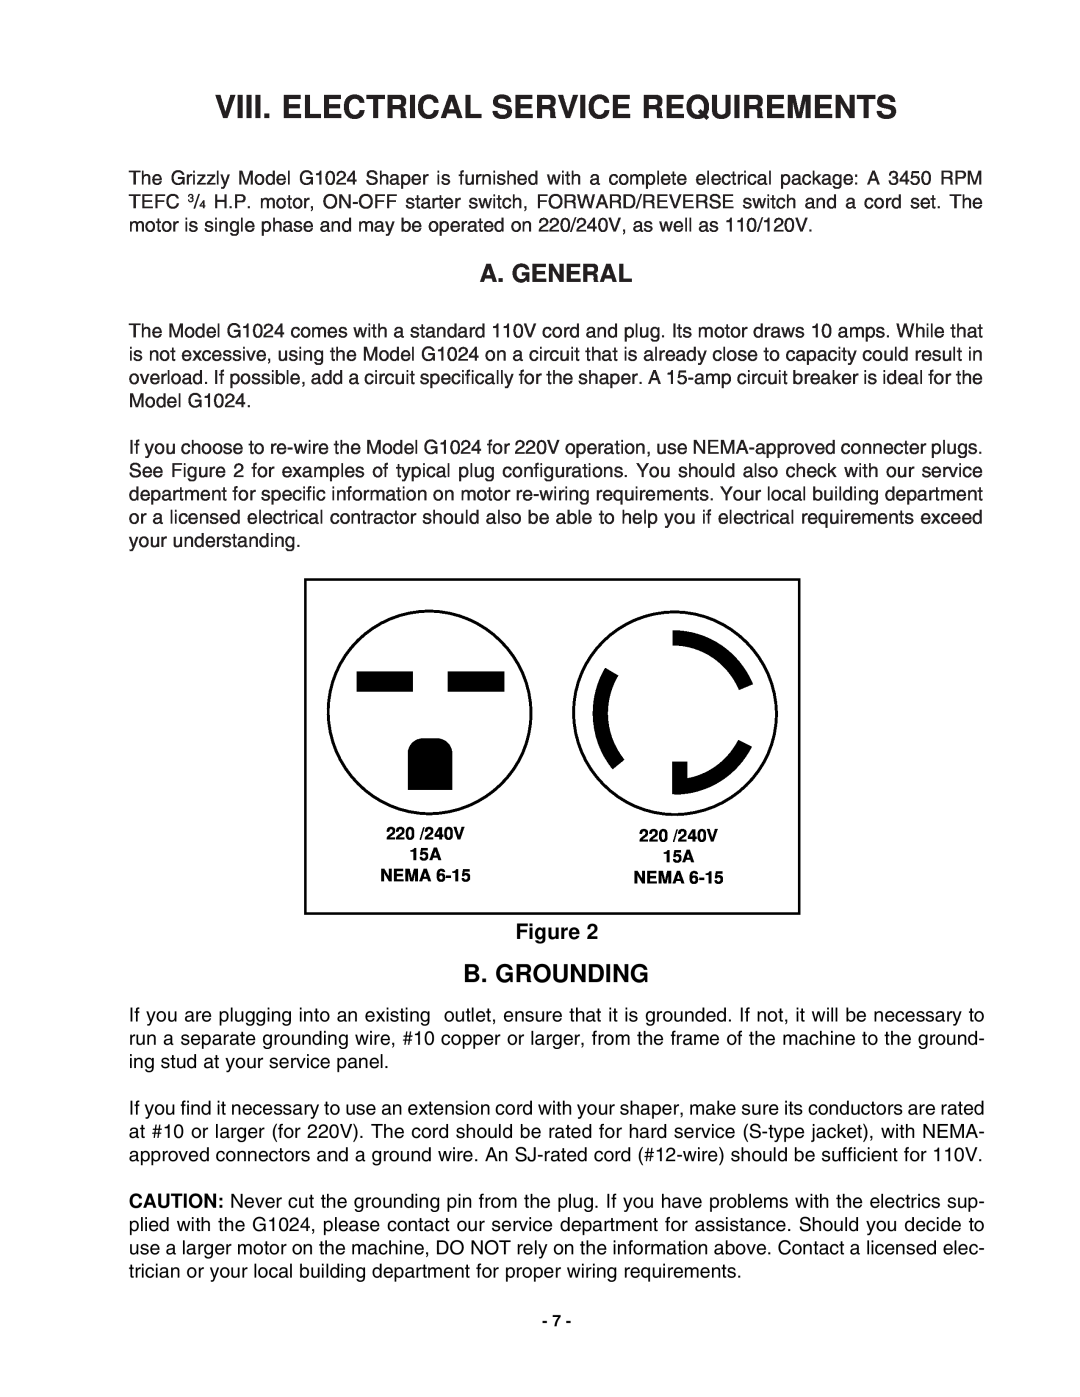 Grizzly G1024 instruction manual Viii. Electrical Service Requirements, B. Grounding, A. General 